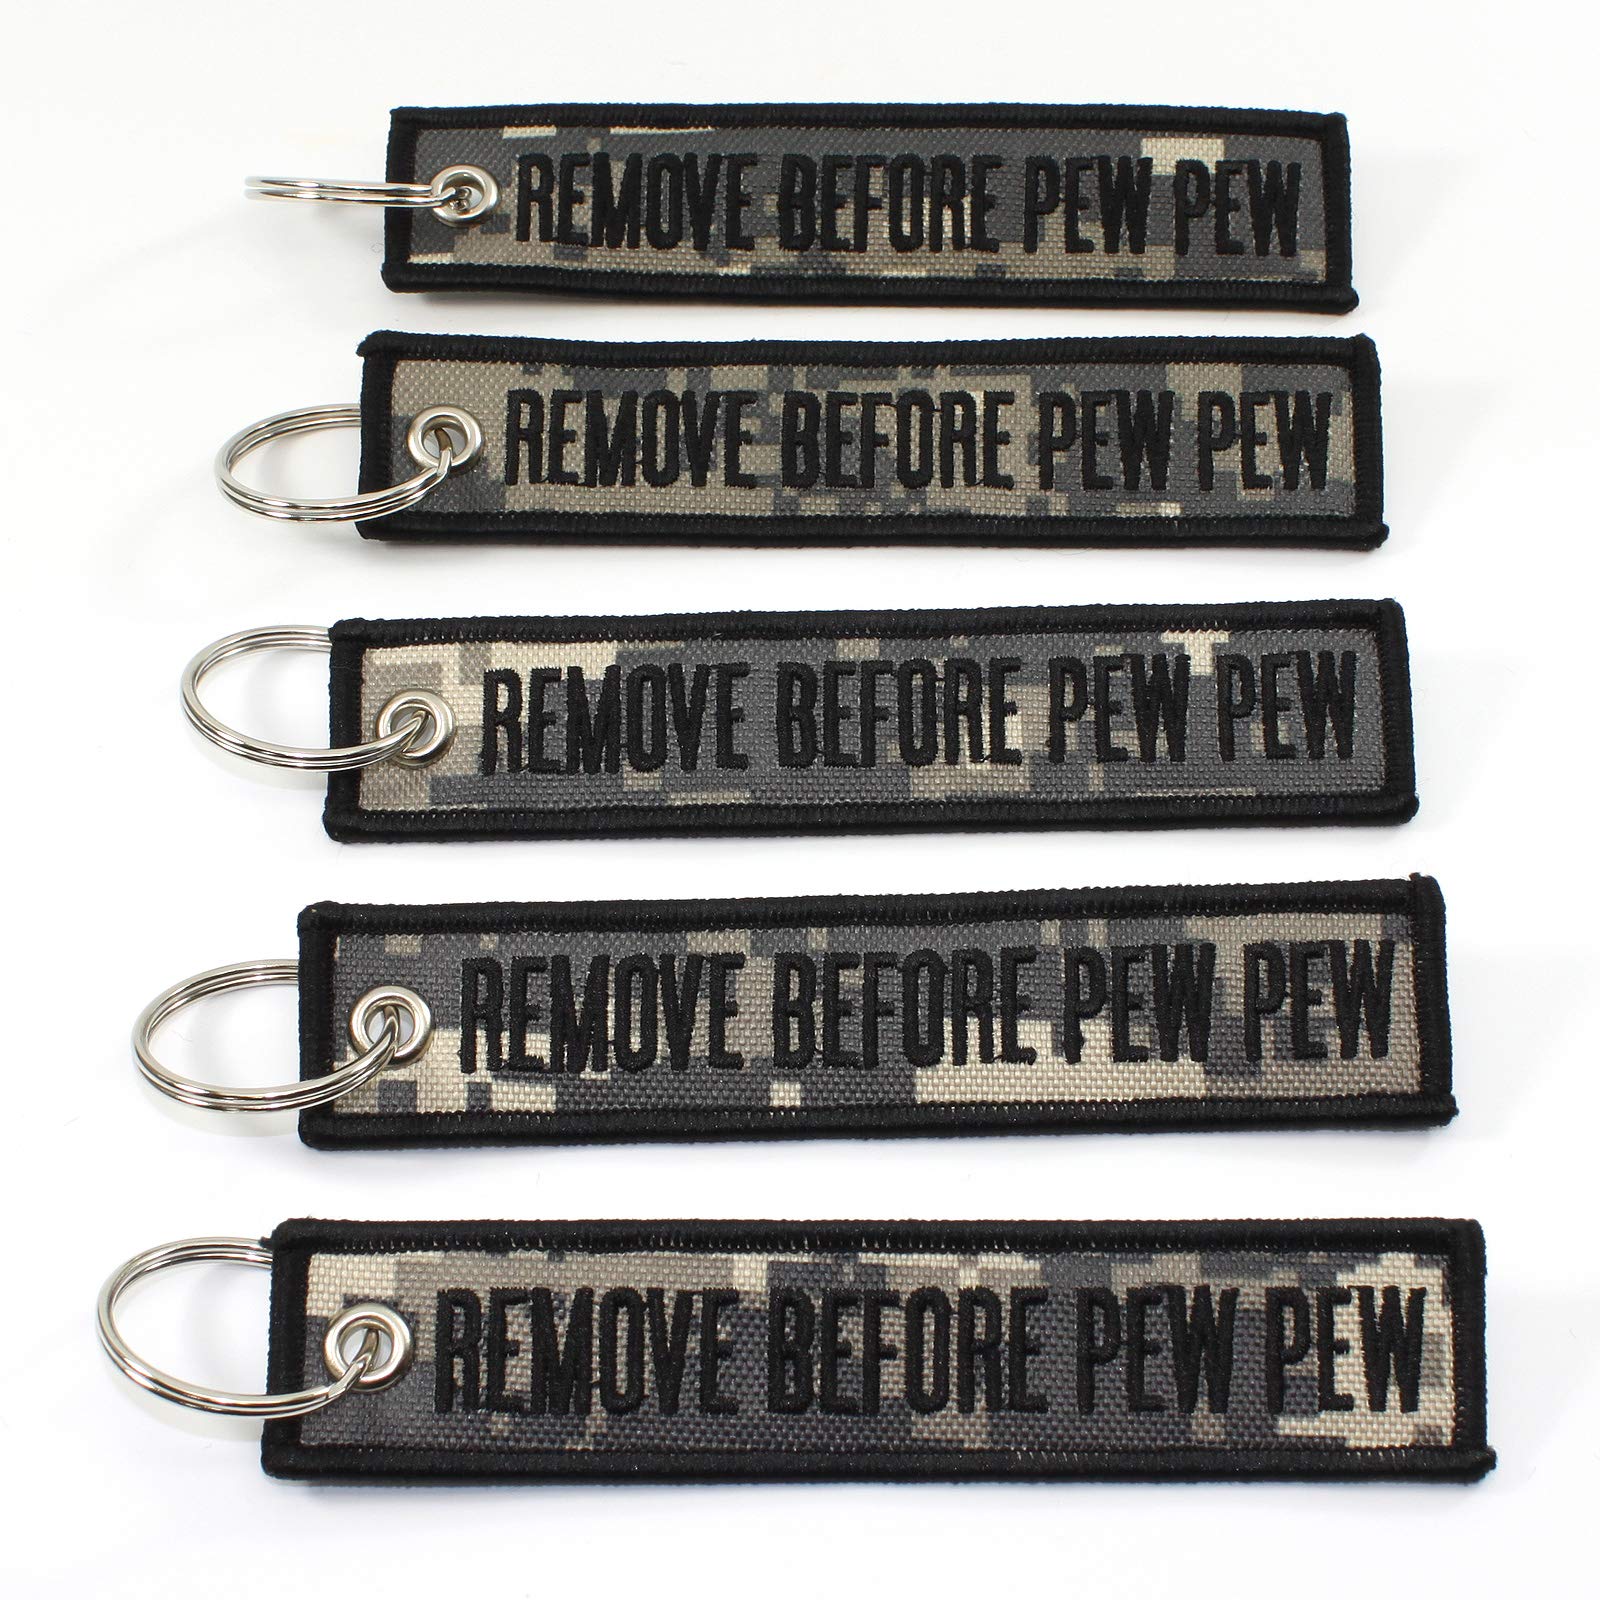 Rotary13B1 Remove Before PEW PEW - Camouflage 5 Stück, Grau, 1 inch x 5 inches von Rotary13B1